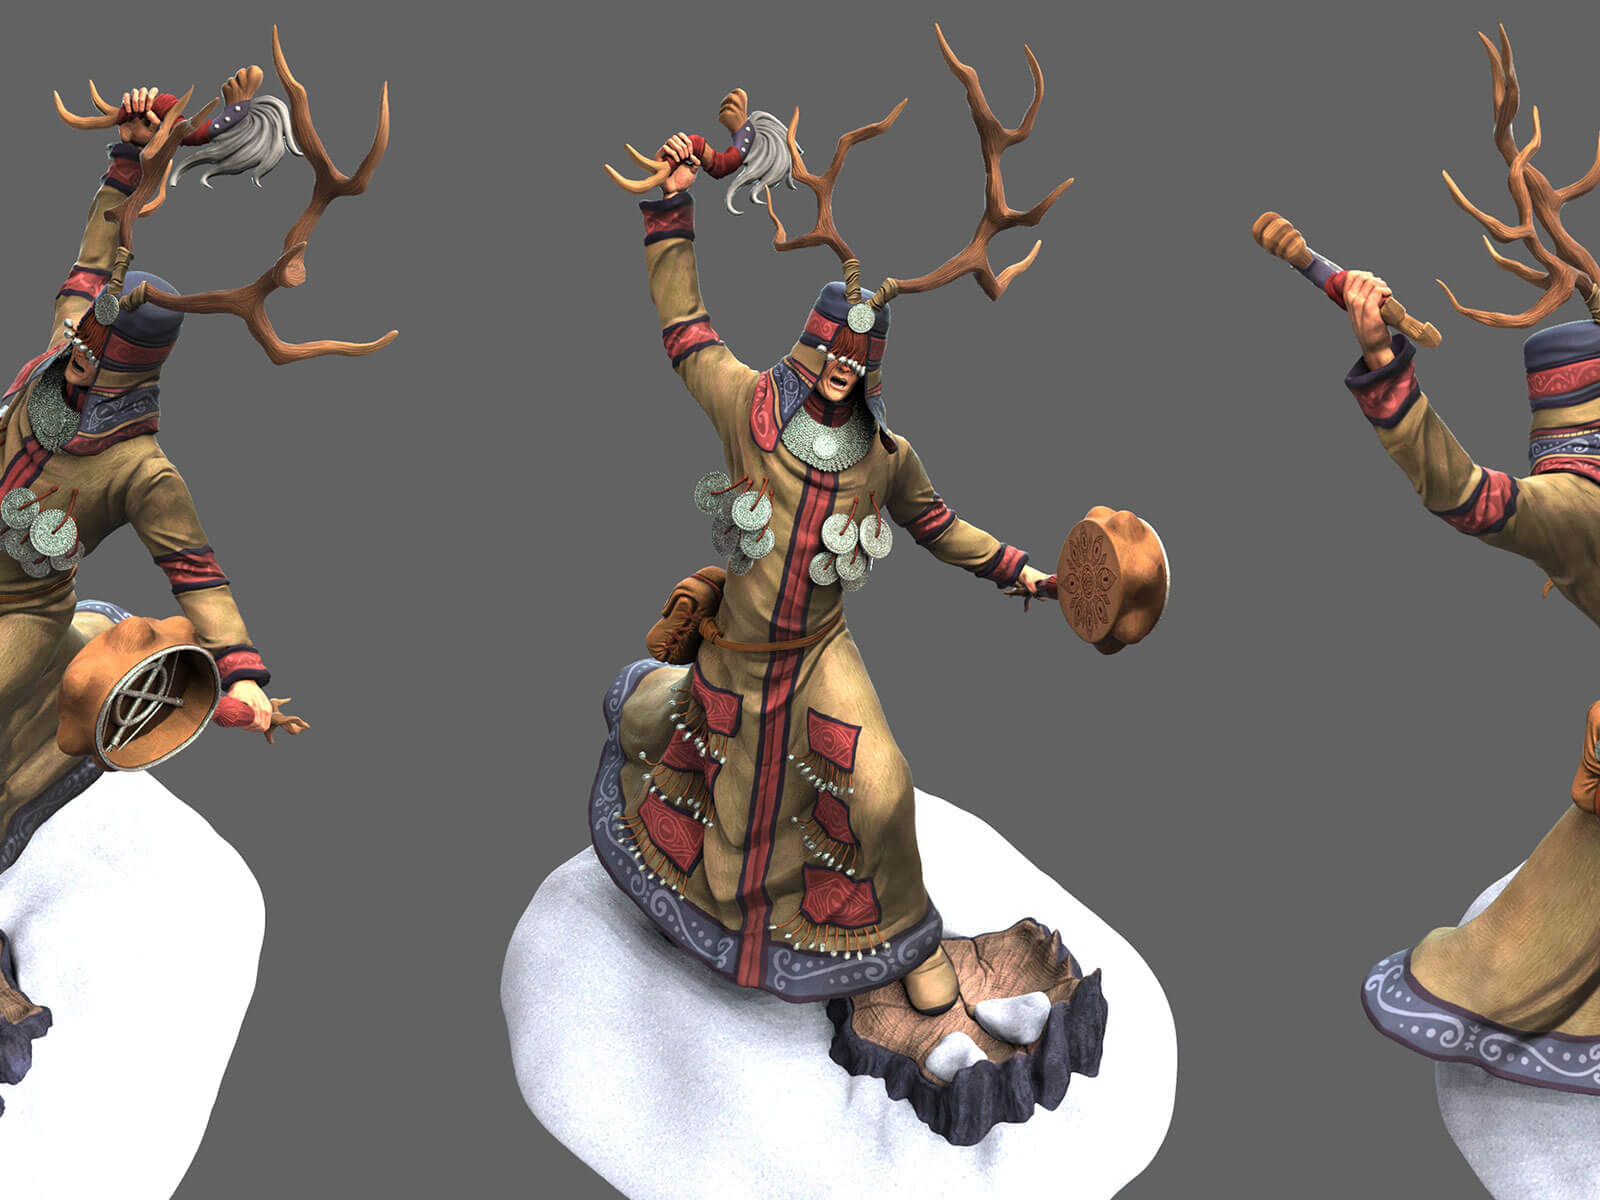 Three views of a shaman about to strike a handheld animal-skin drum wearing a brown frock and antlered headdress.